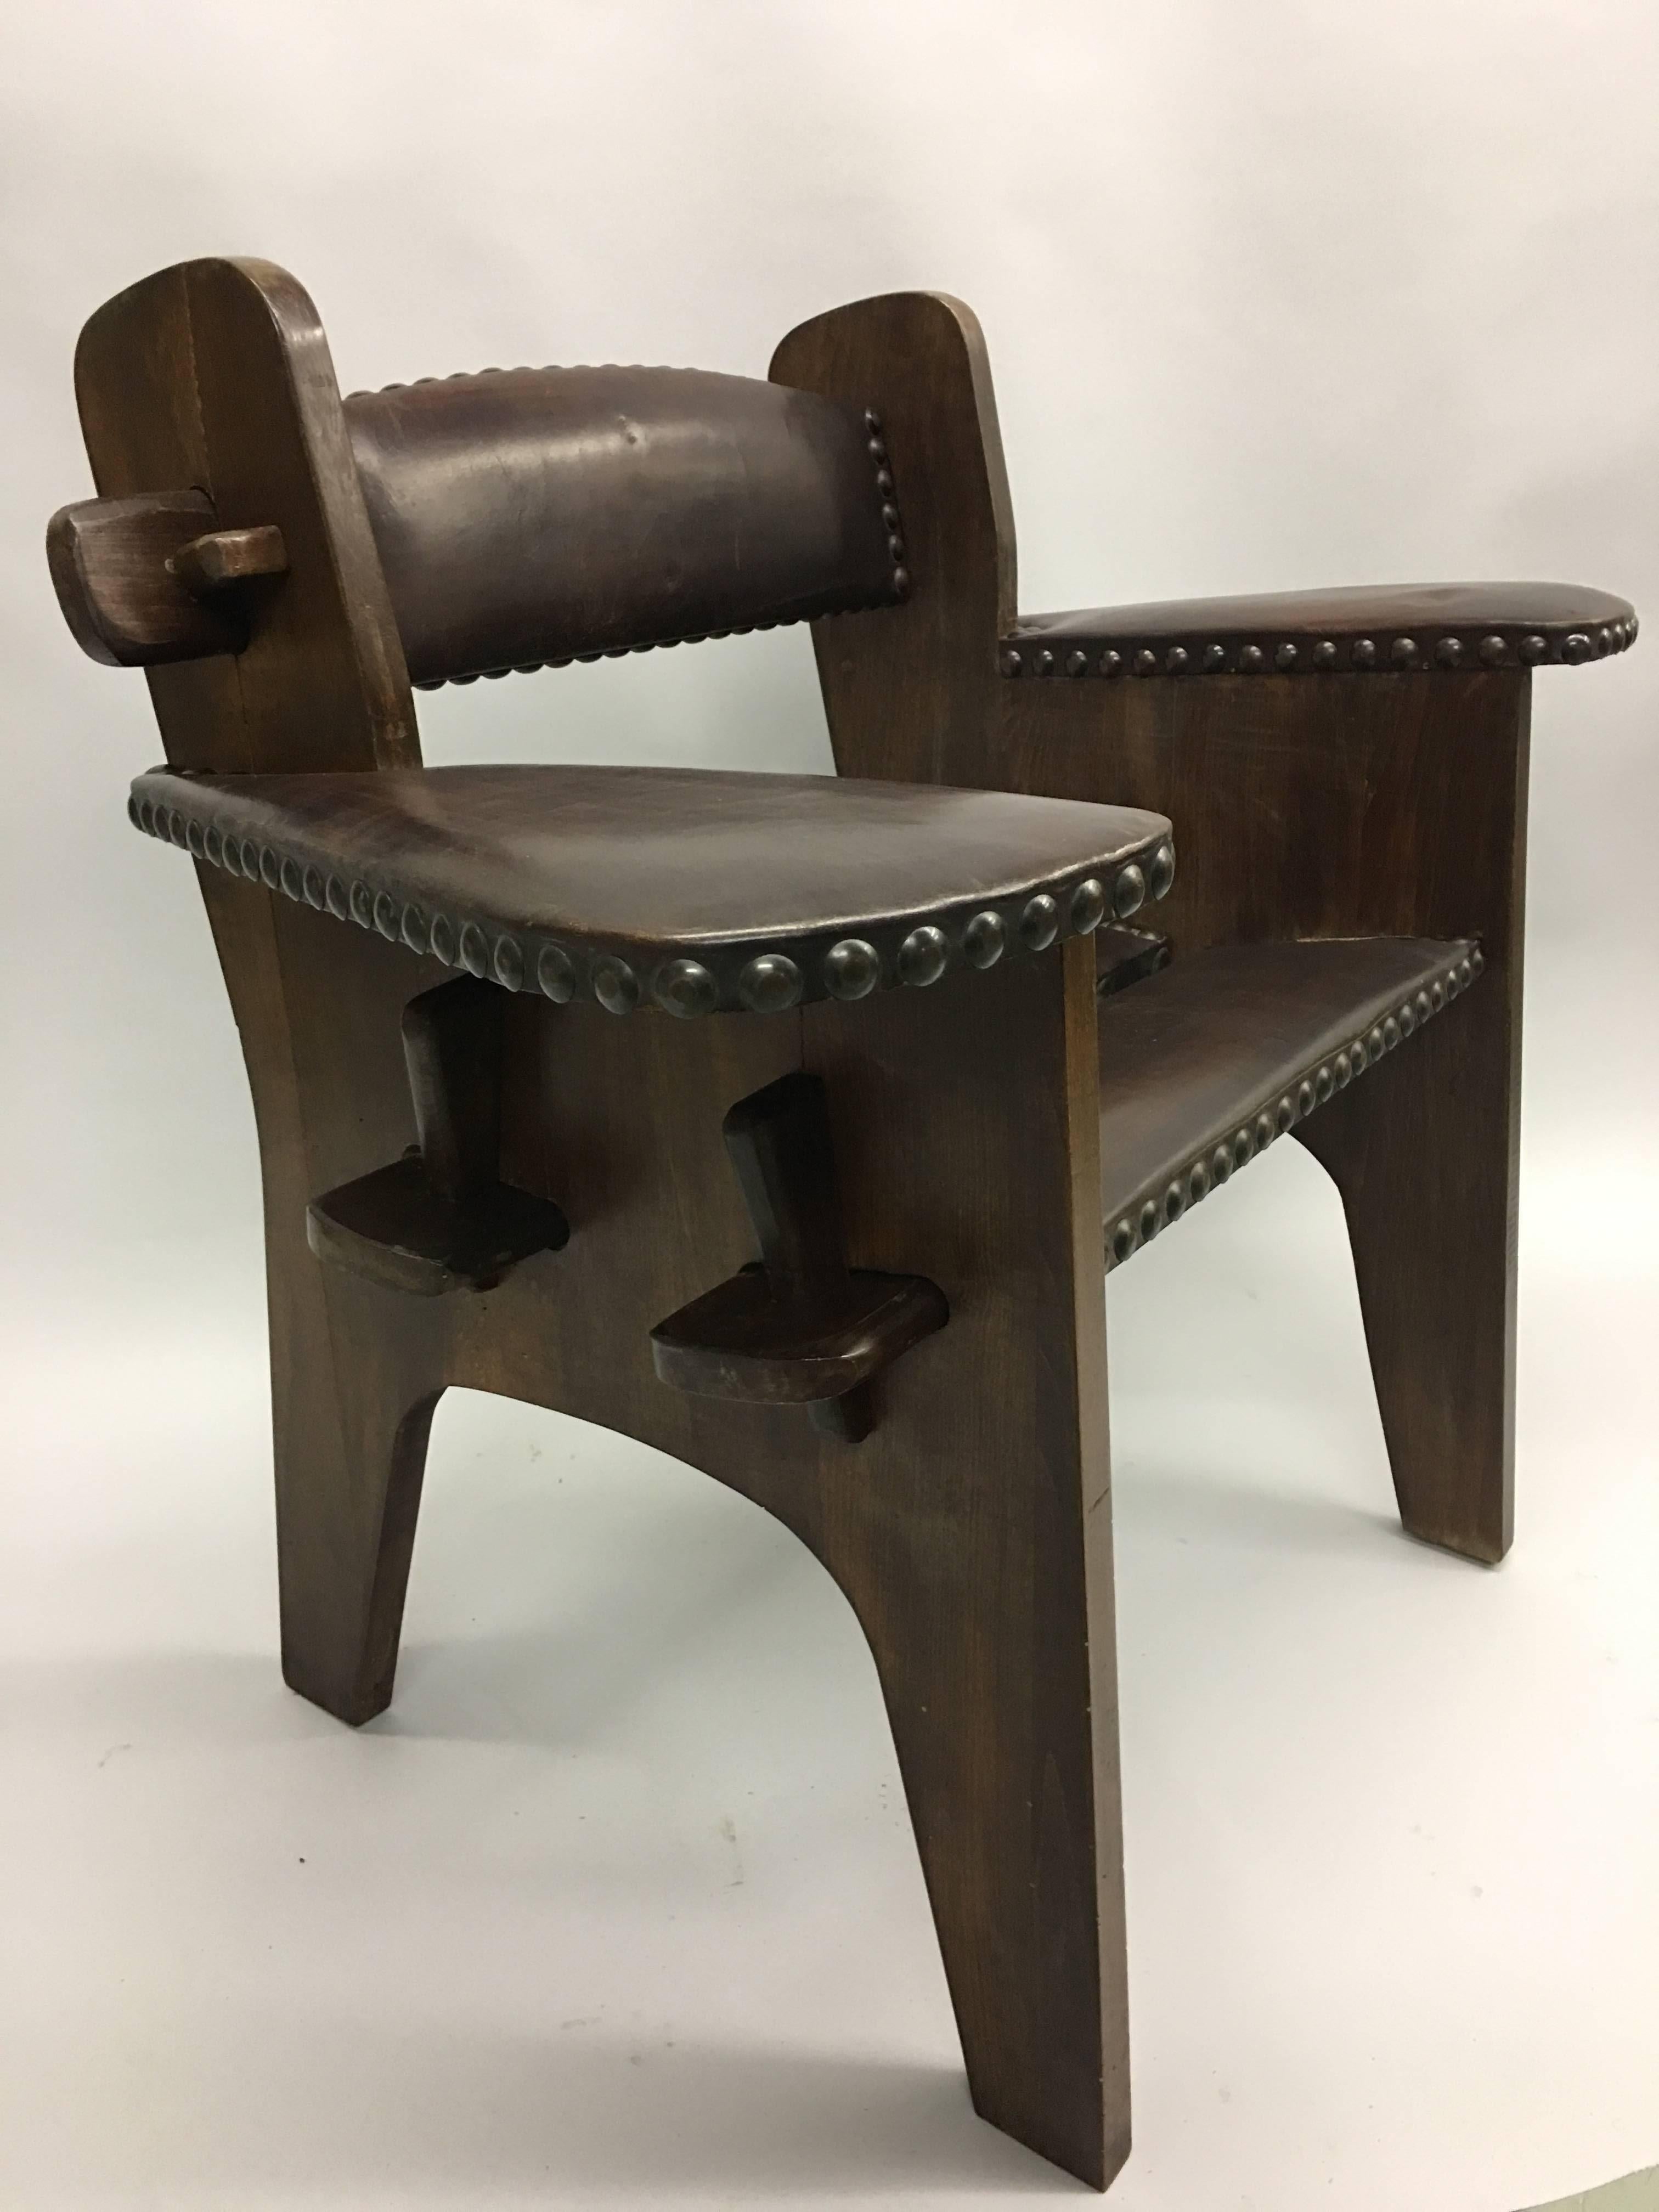 Rare, unique pair of Italian early modernist armchairs attributed to Giacomo Balla. The chairs integrate futurist aesthetics with Arts & Crafts style.

The pieces utilize typical Arts & Crafts materials. They are in solid wood with large studded